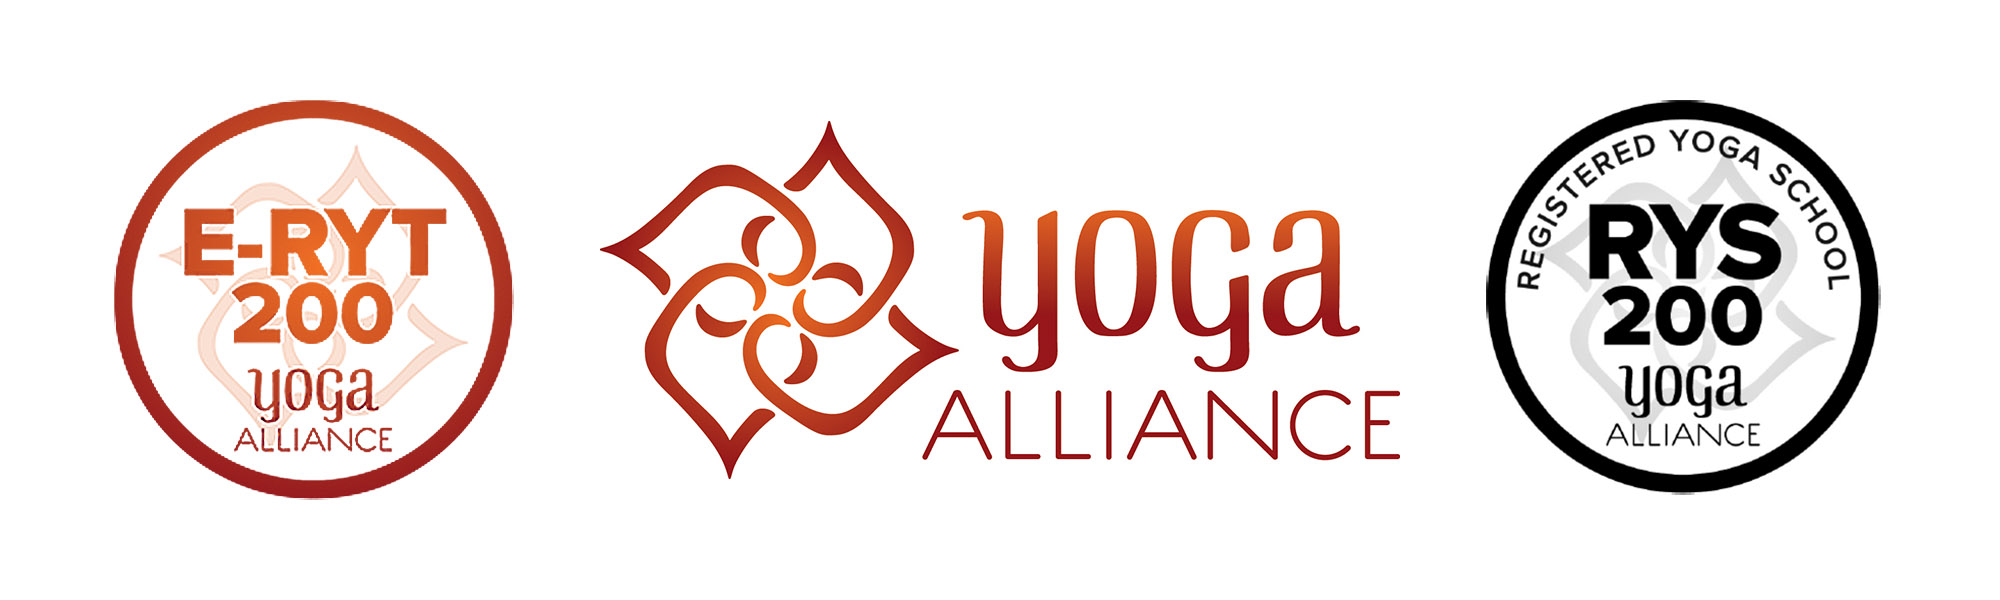 200 Hour Yoga Alliance Certification  International Society of Precision  Agriculture